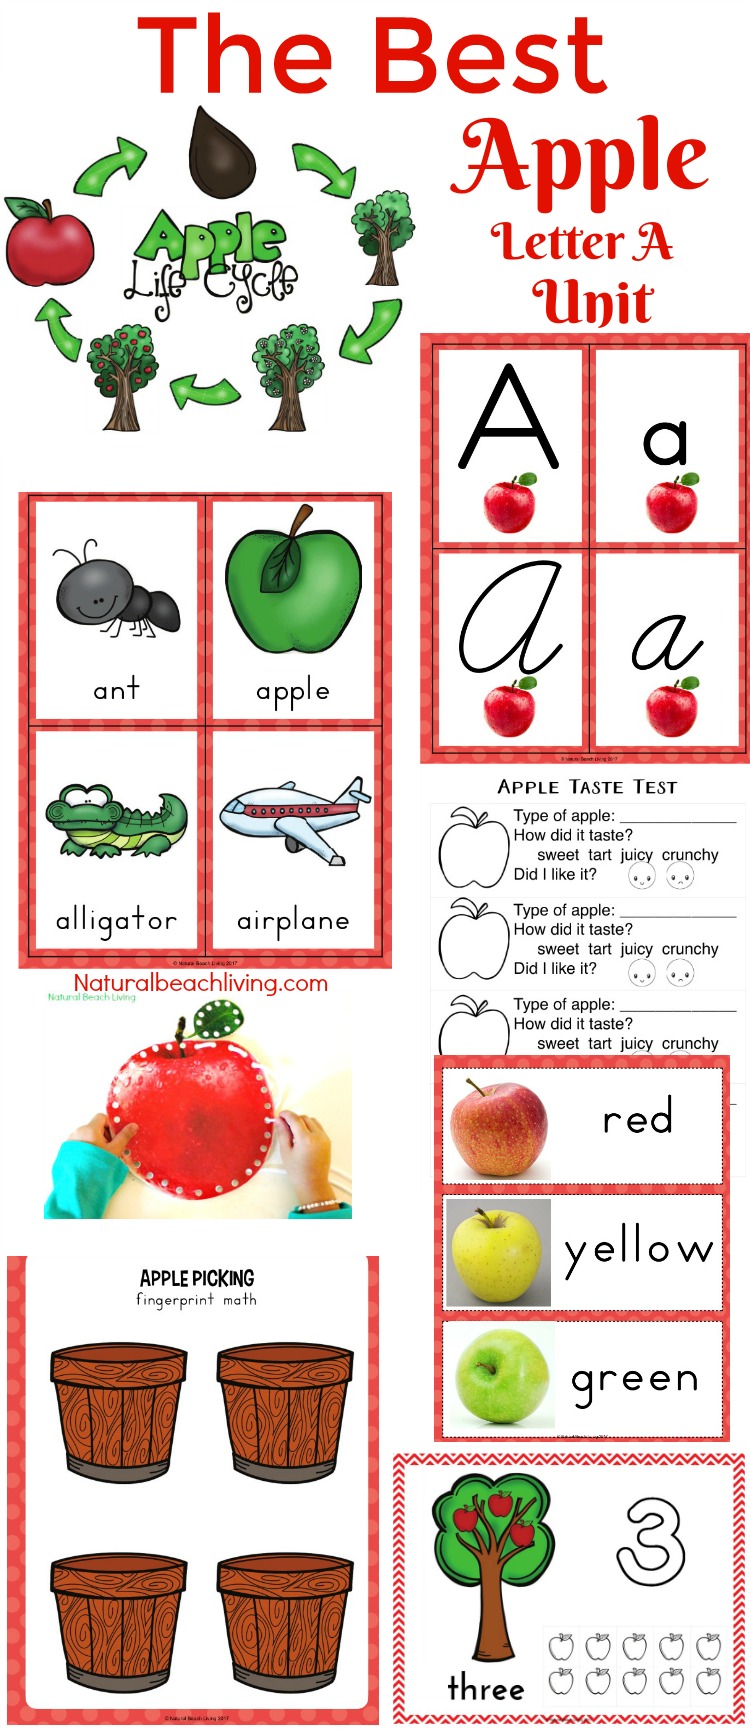 50+ Apple crafts for Preschoolers, paper apple crafts, apple crafts for kindergarten, Fall is perfect for Apple Crafts for kids. Whether you are looking for easy toddler apple crafts or fun apple crafts for themed learning with preschoolers and kindergarten, these apple projects will give you great ideas for kids crafting all season long. There are so many different ways to get creative and crafty with apples. 